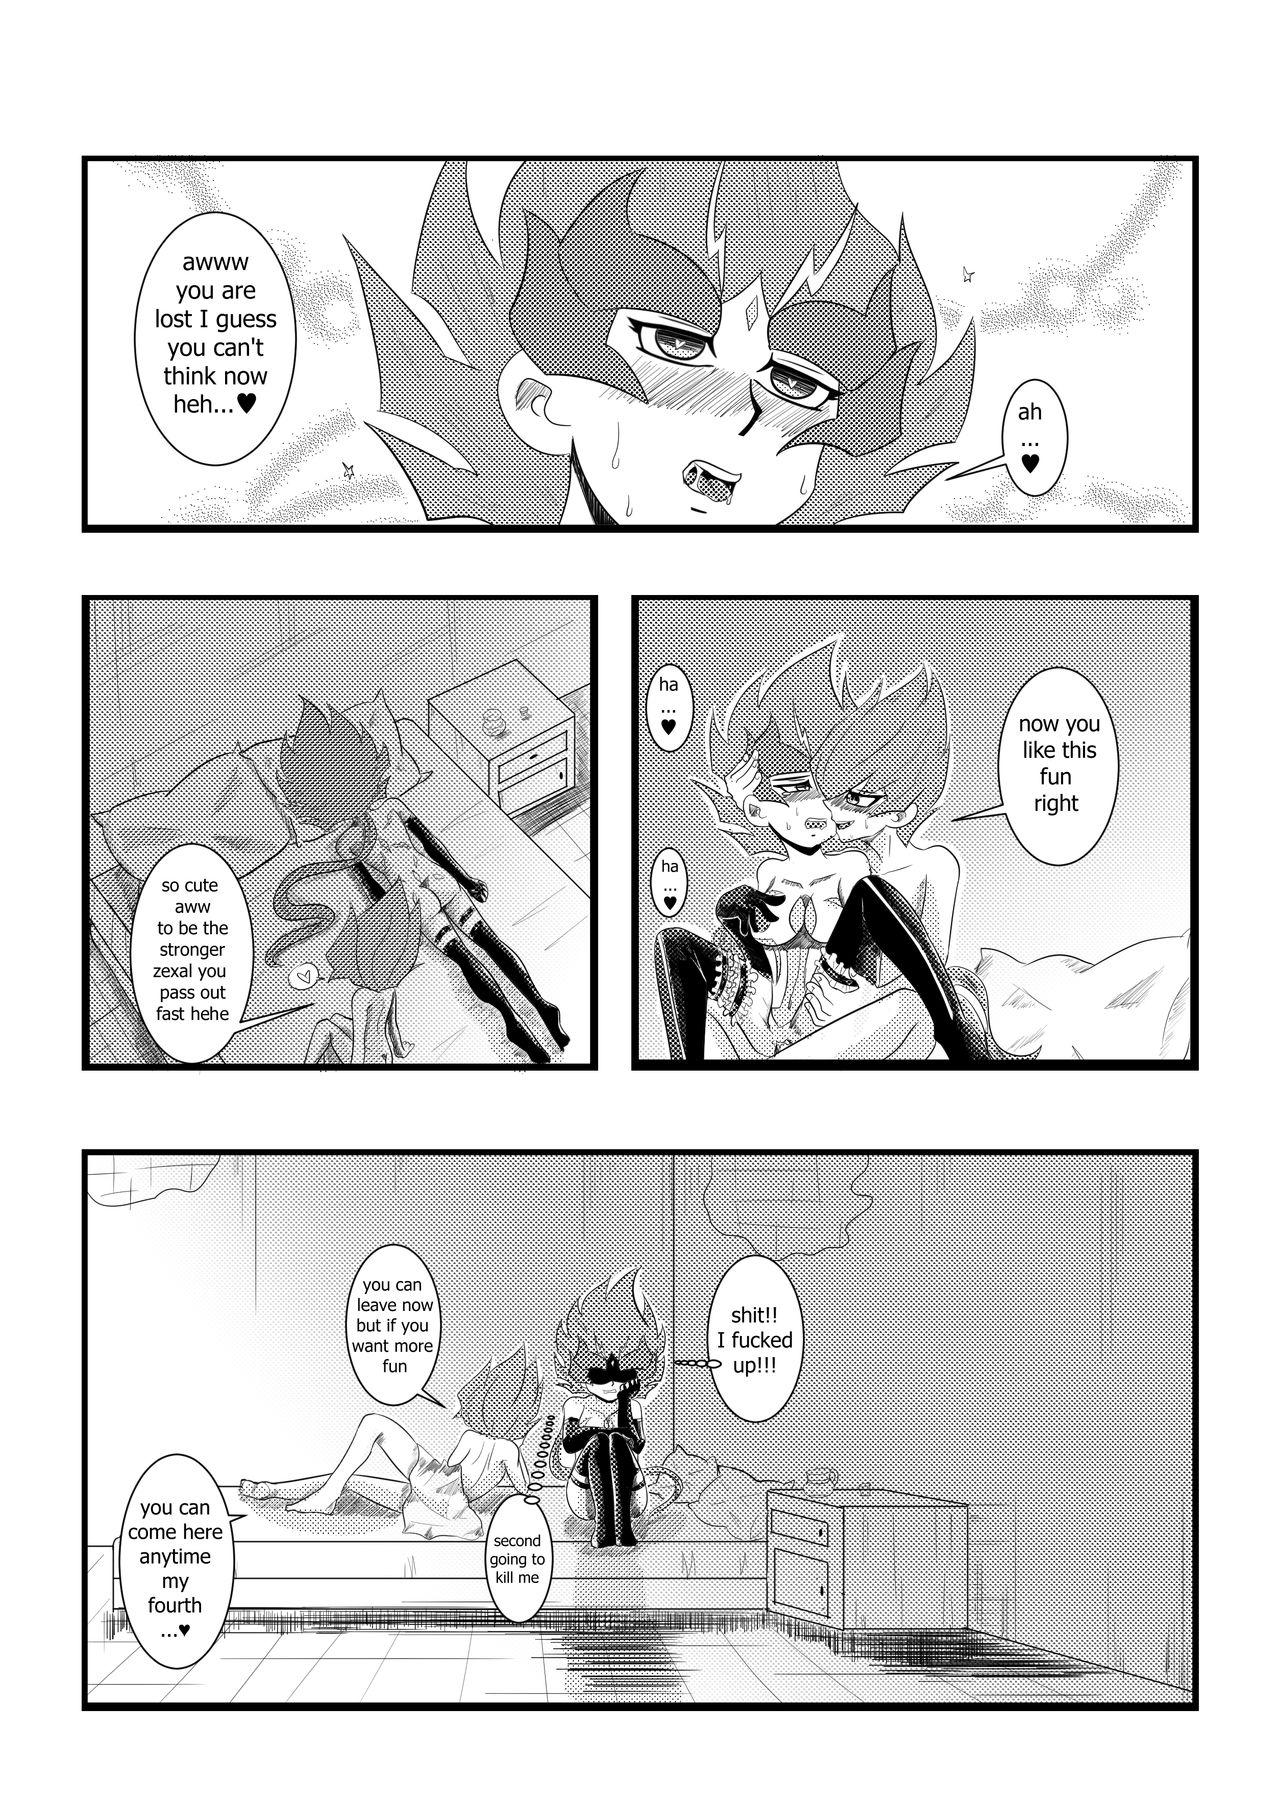 Chile For Her - Yu-gi-oh zexal Stepfamily - Page 21